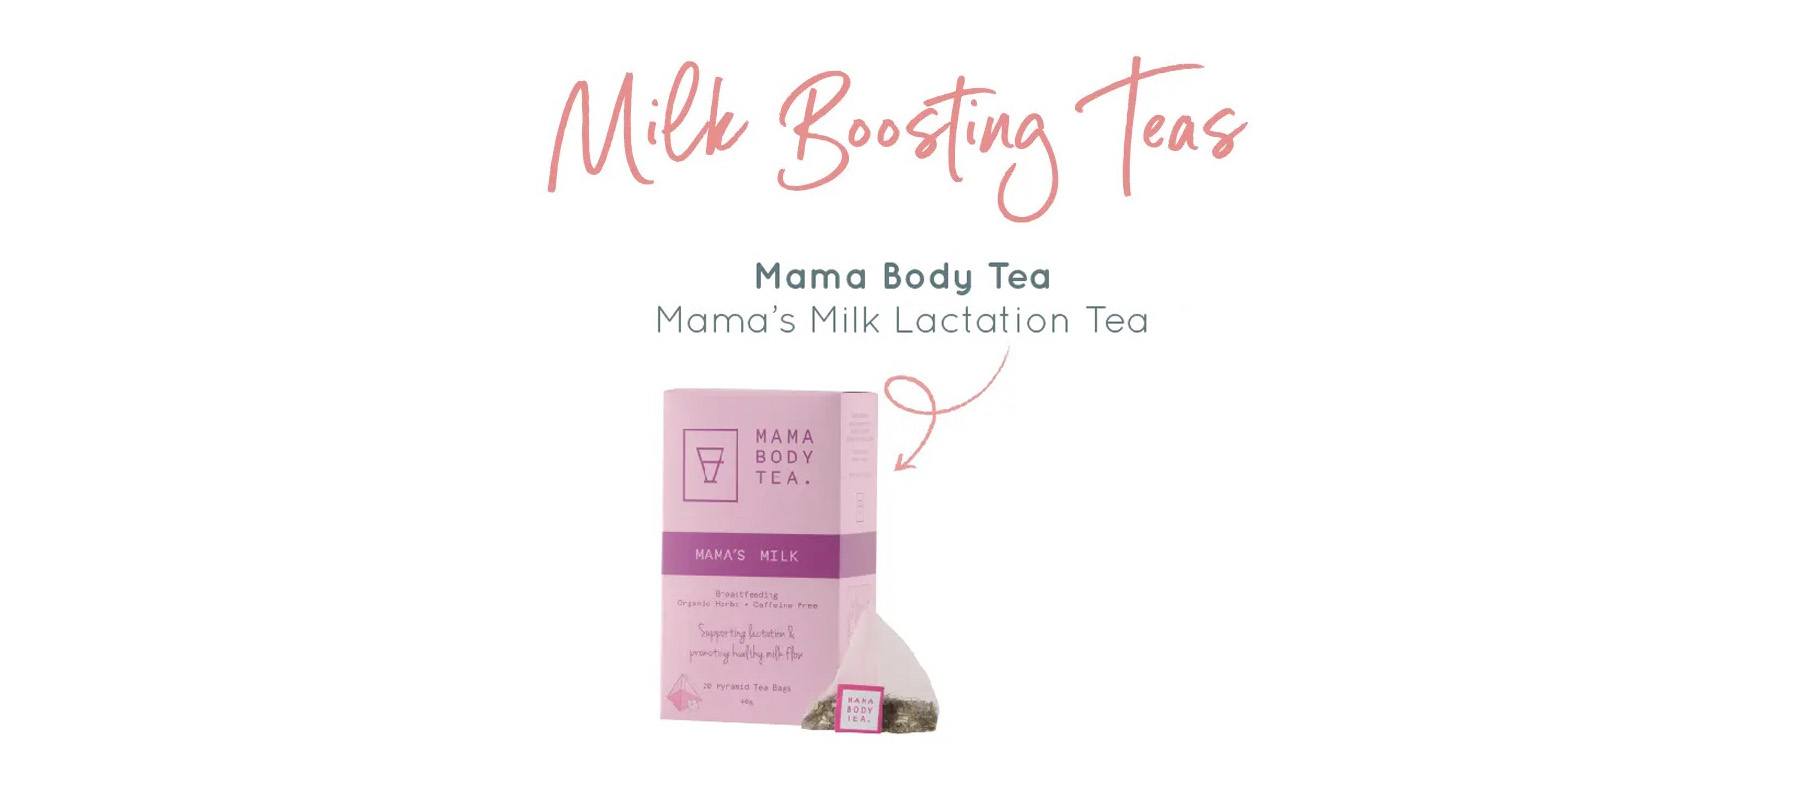 Milk Boosting Teas, Shakes and Cookie Mixes